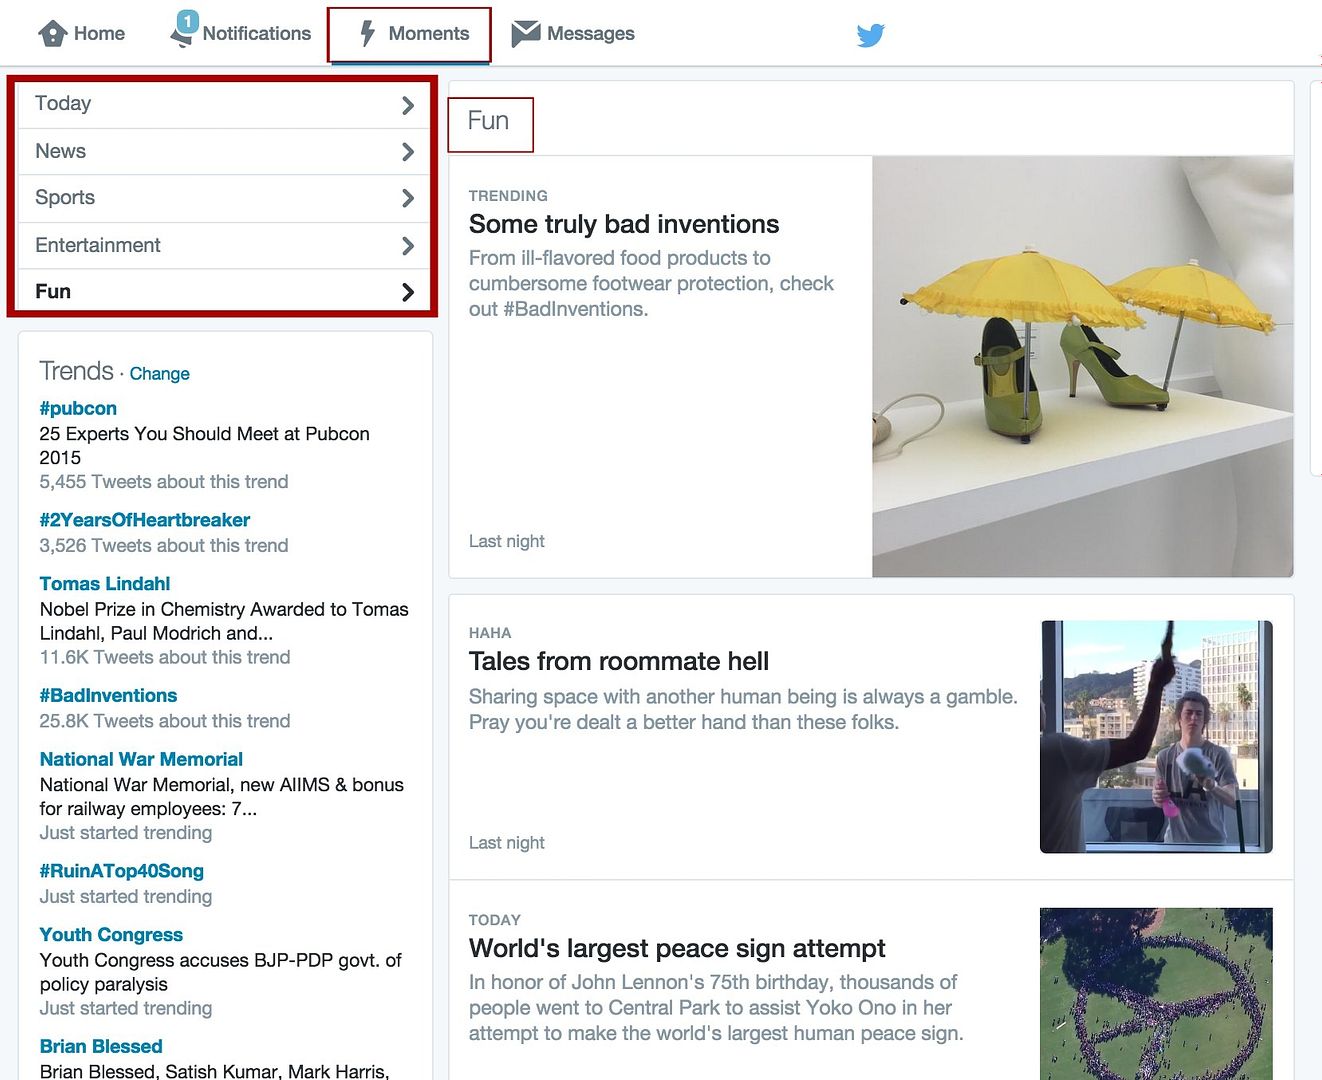 The new Twitter Moments: A quick way to get a curated selection of stories around popular topics or trending news stories